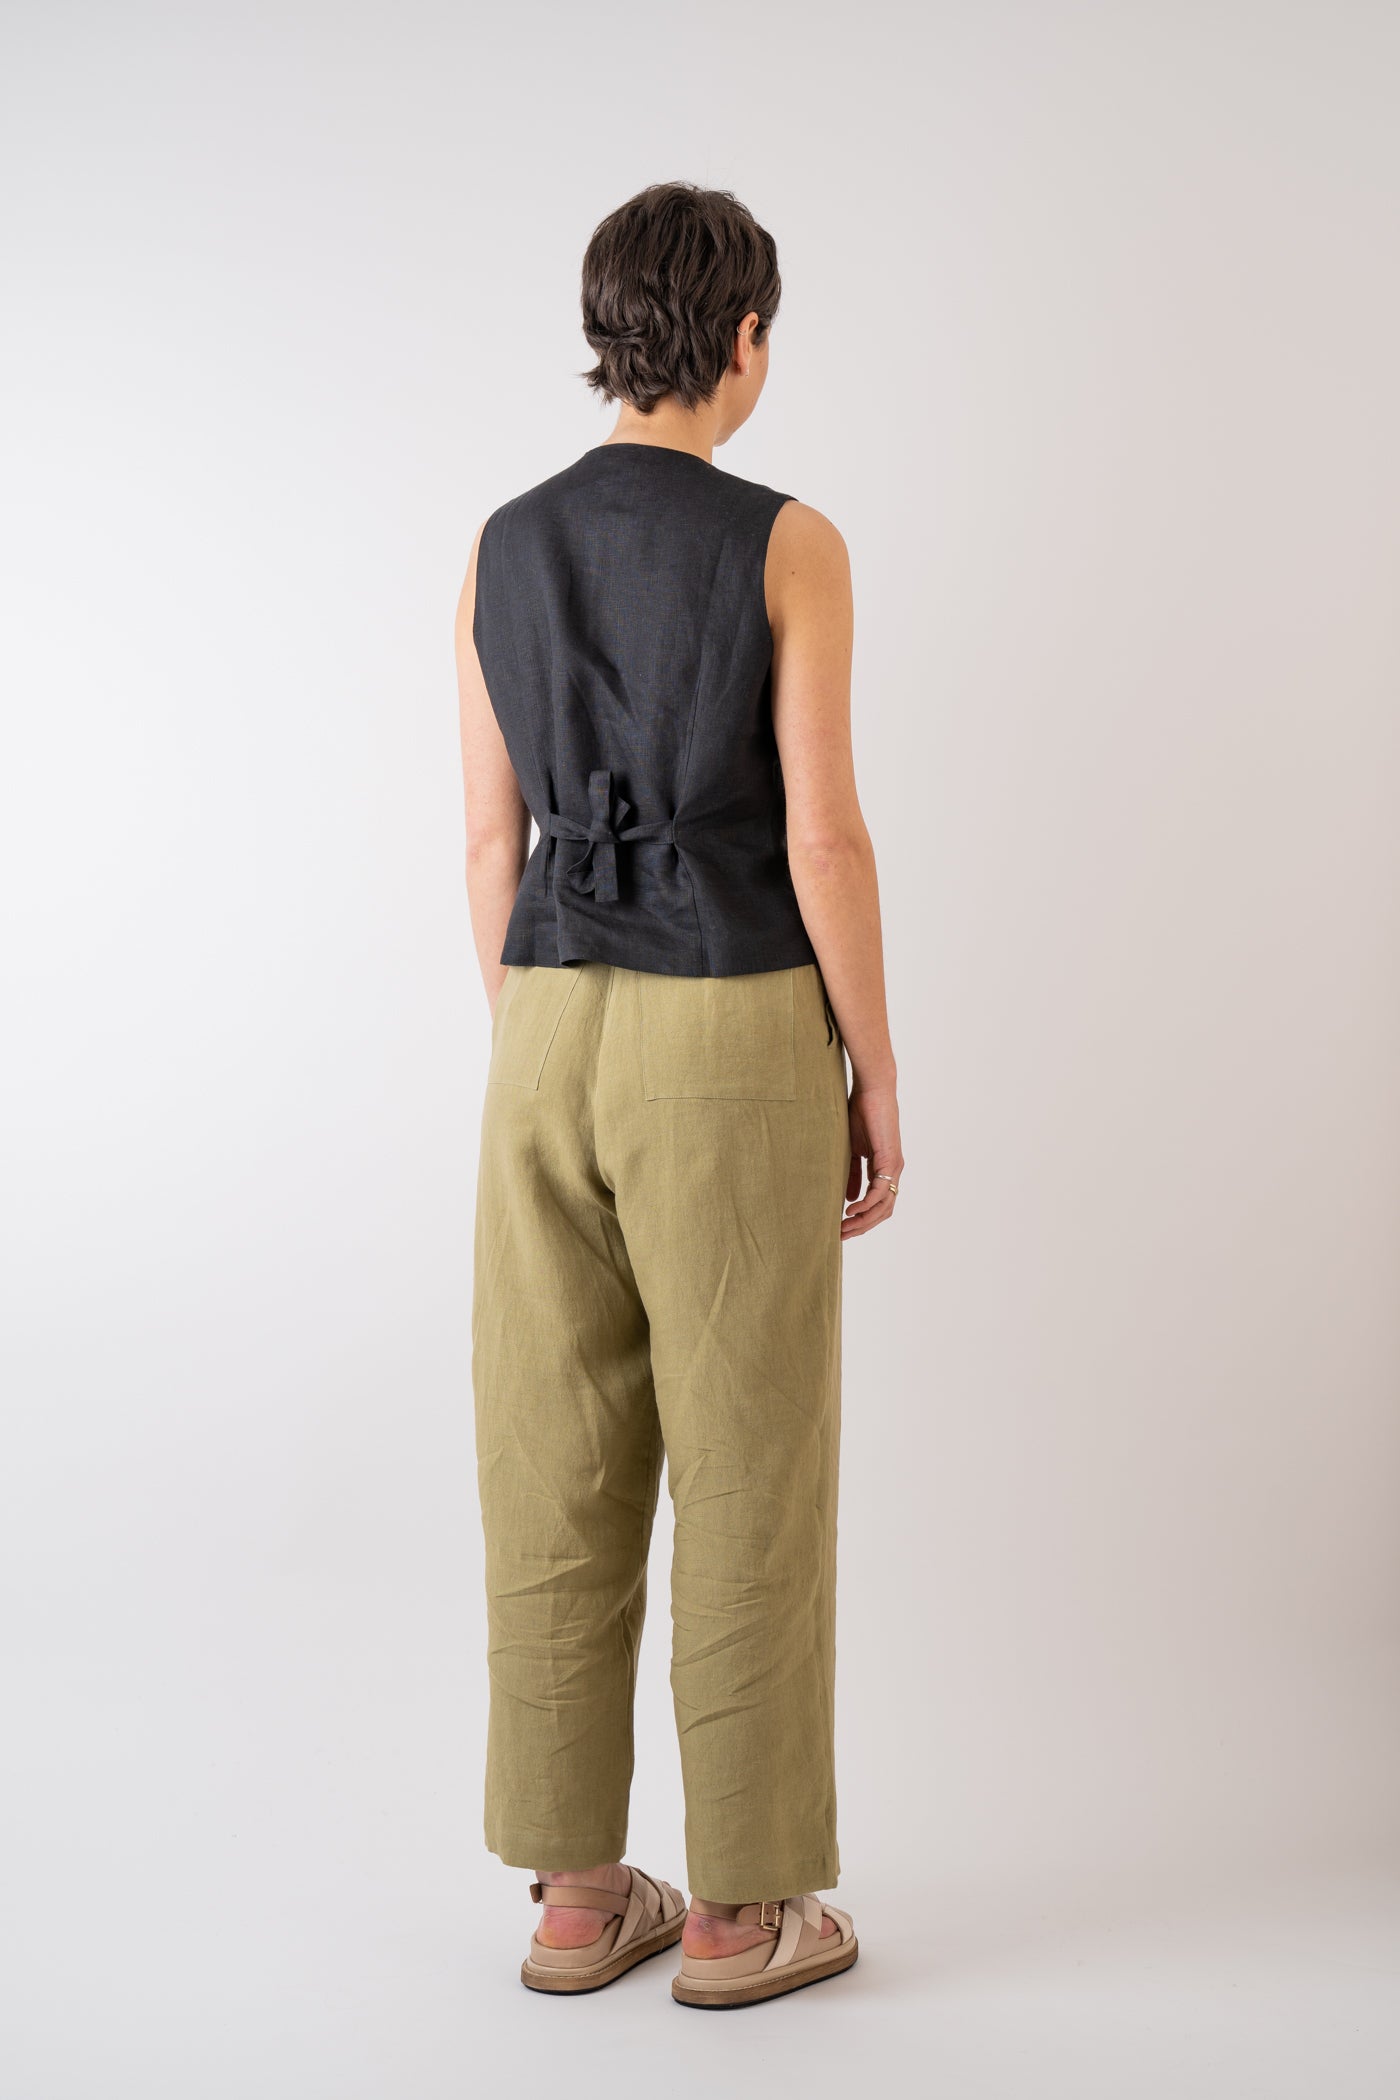 Xi Atelier Linen Avery Waistcoat in black with adjustable tie at the back